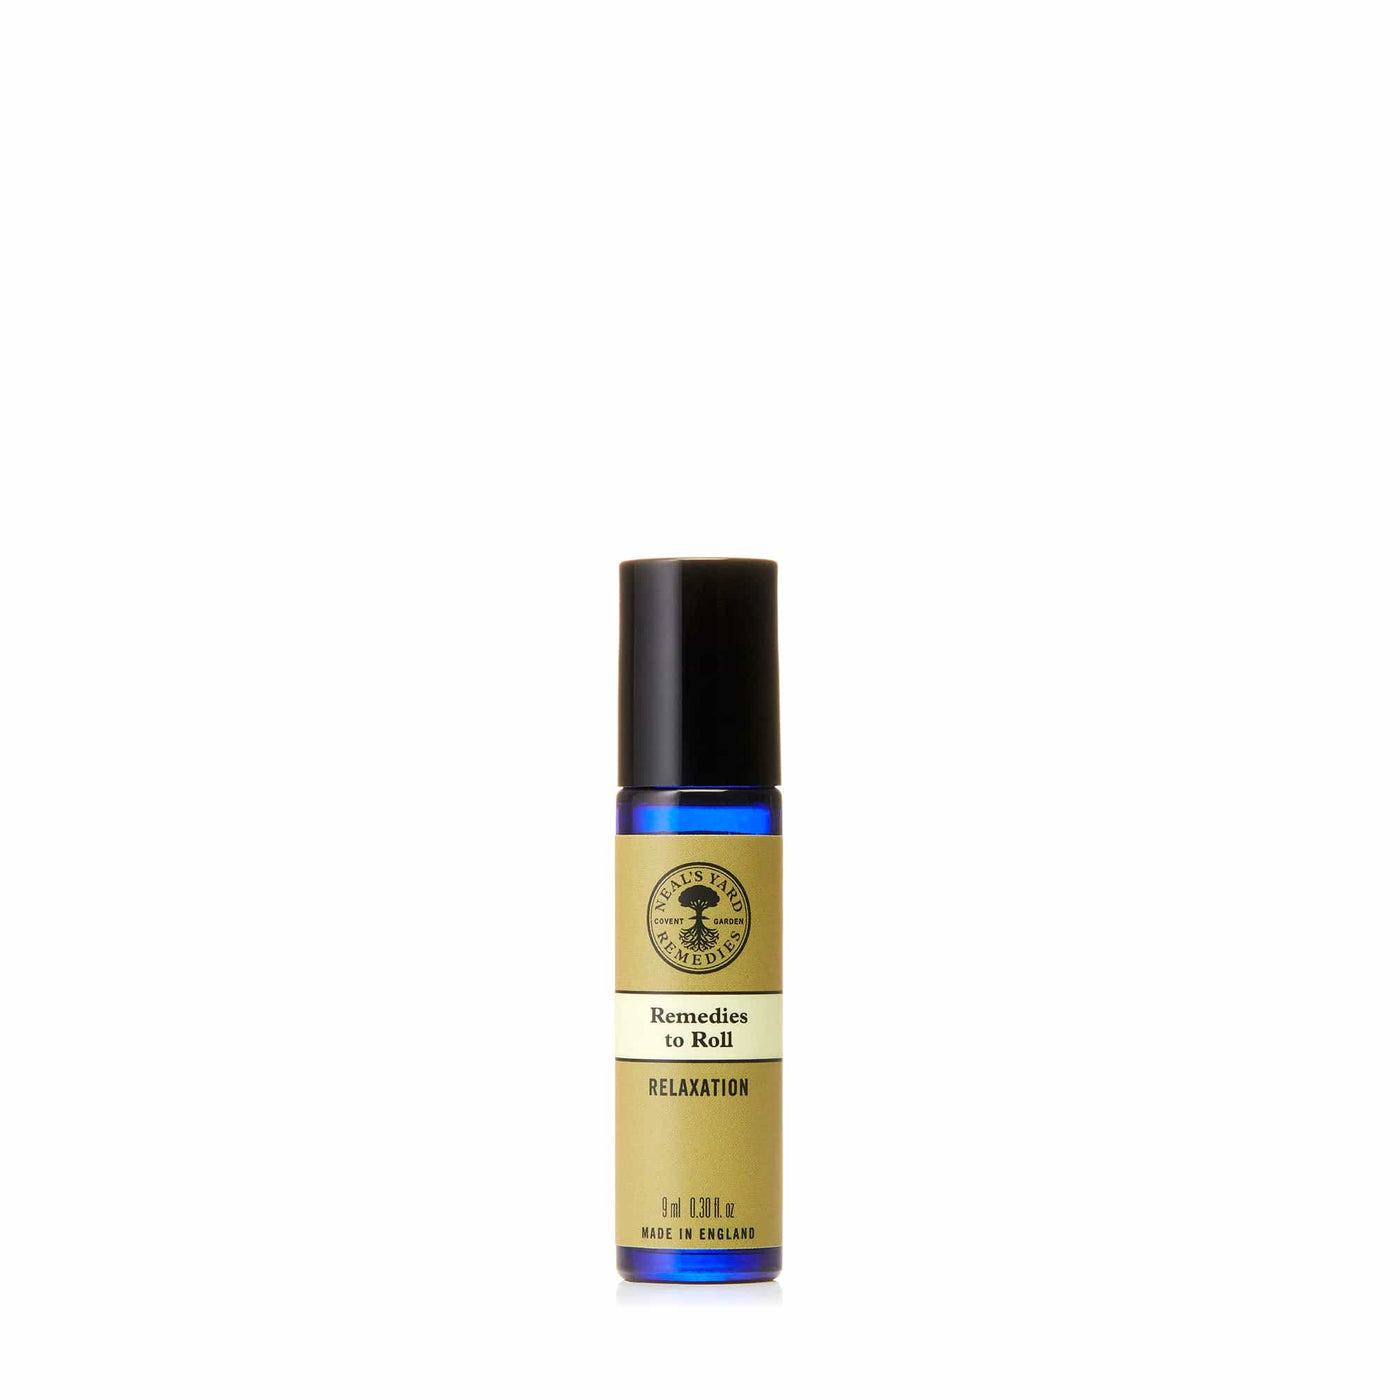 Neal's Yard Remedies Aromatherapy Remedies to Roll Relaxation 0.30 fl. oz